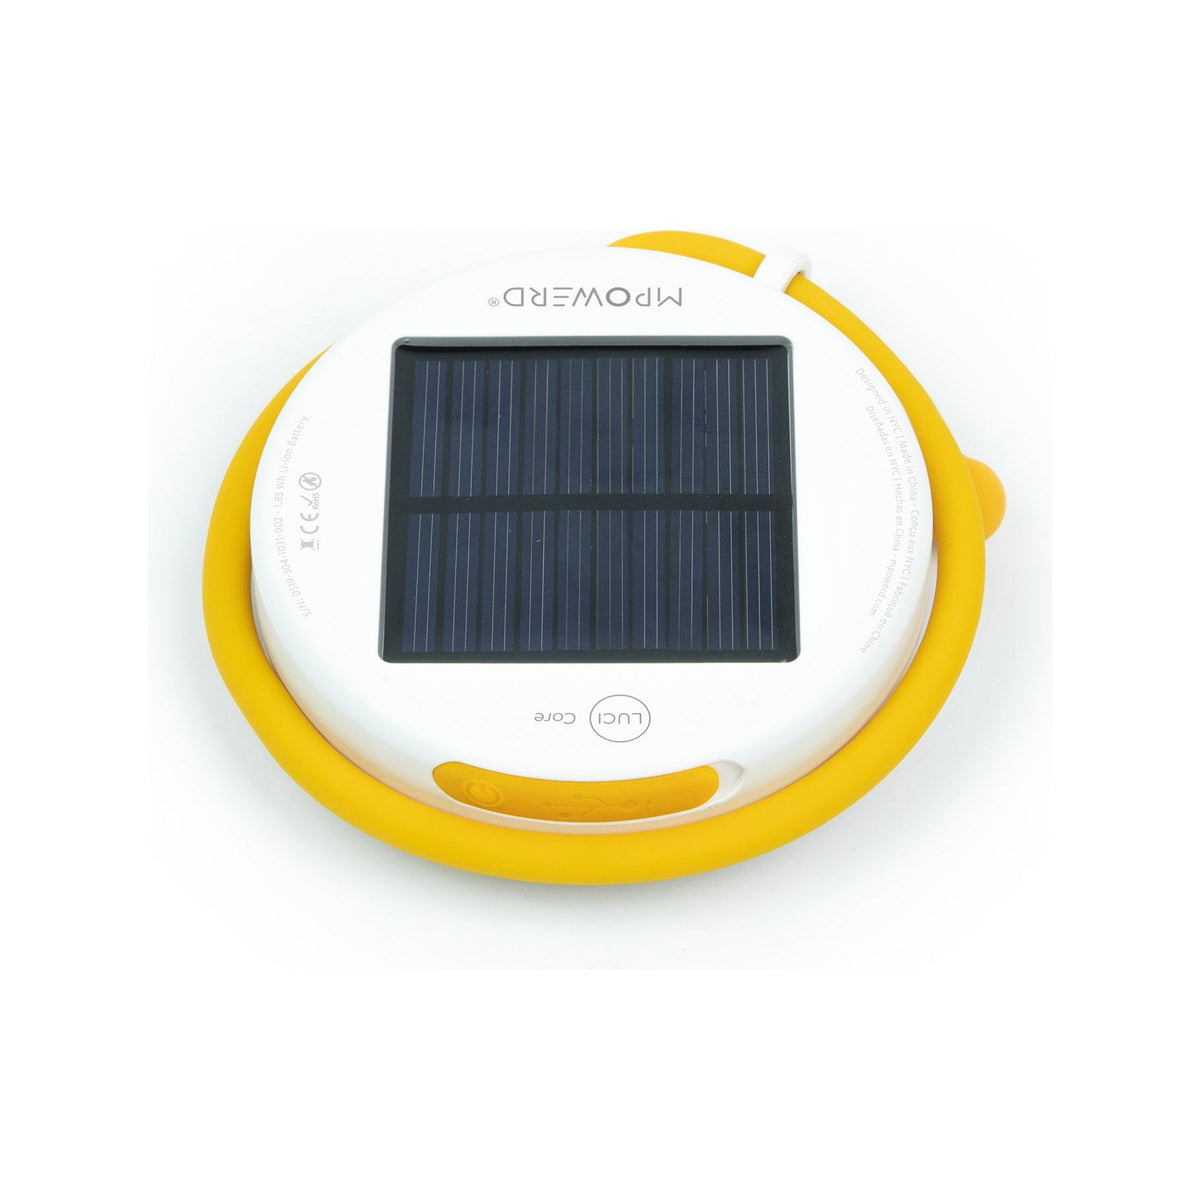 Luci Core Solar and USB Charging Light